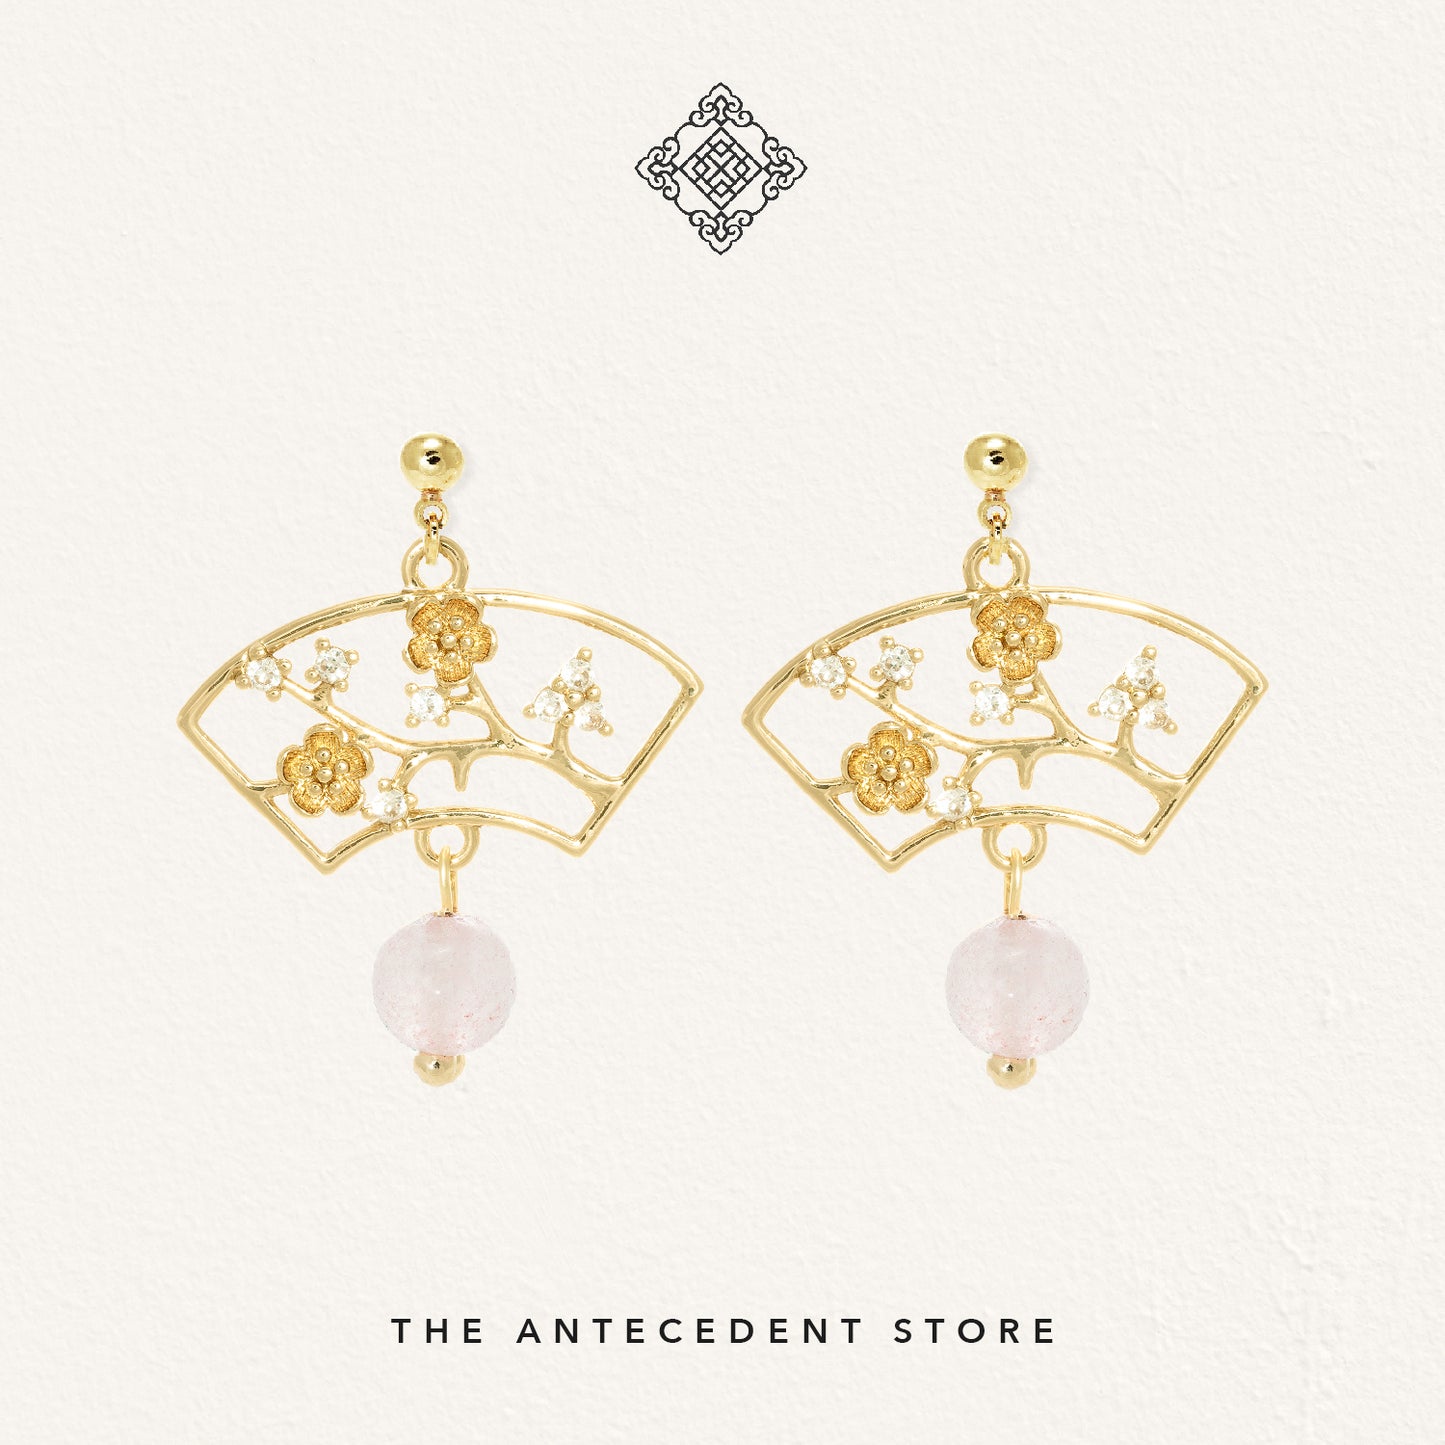 Cherry Blossom Earrings With Rose Quartz - 14K Real Gold Plated Jewelry